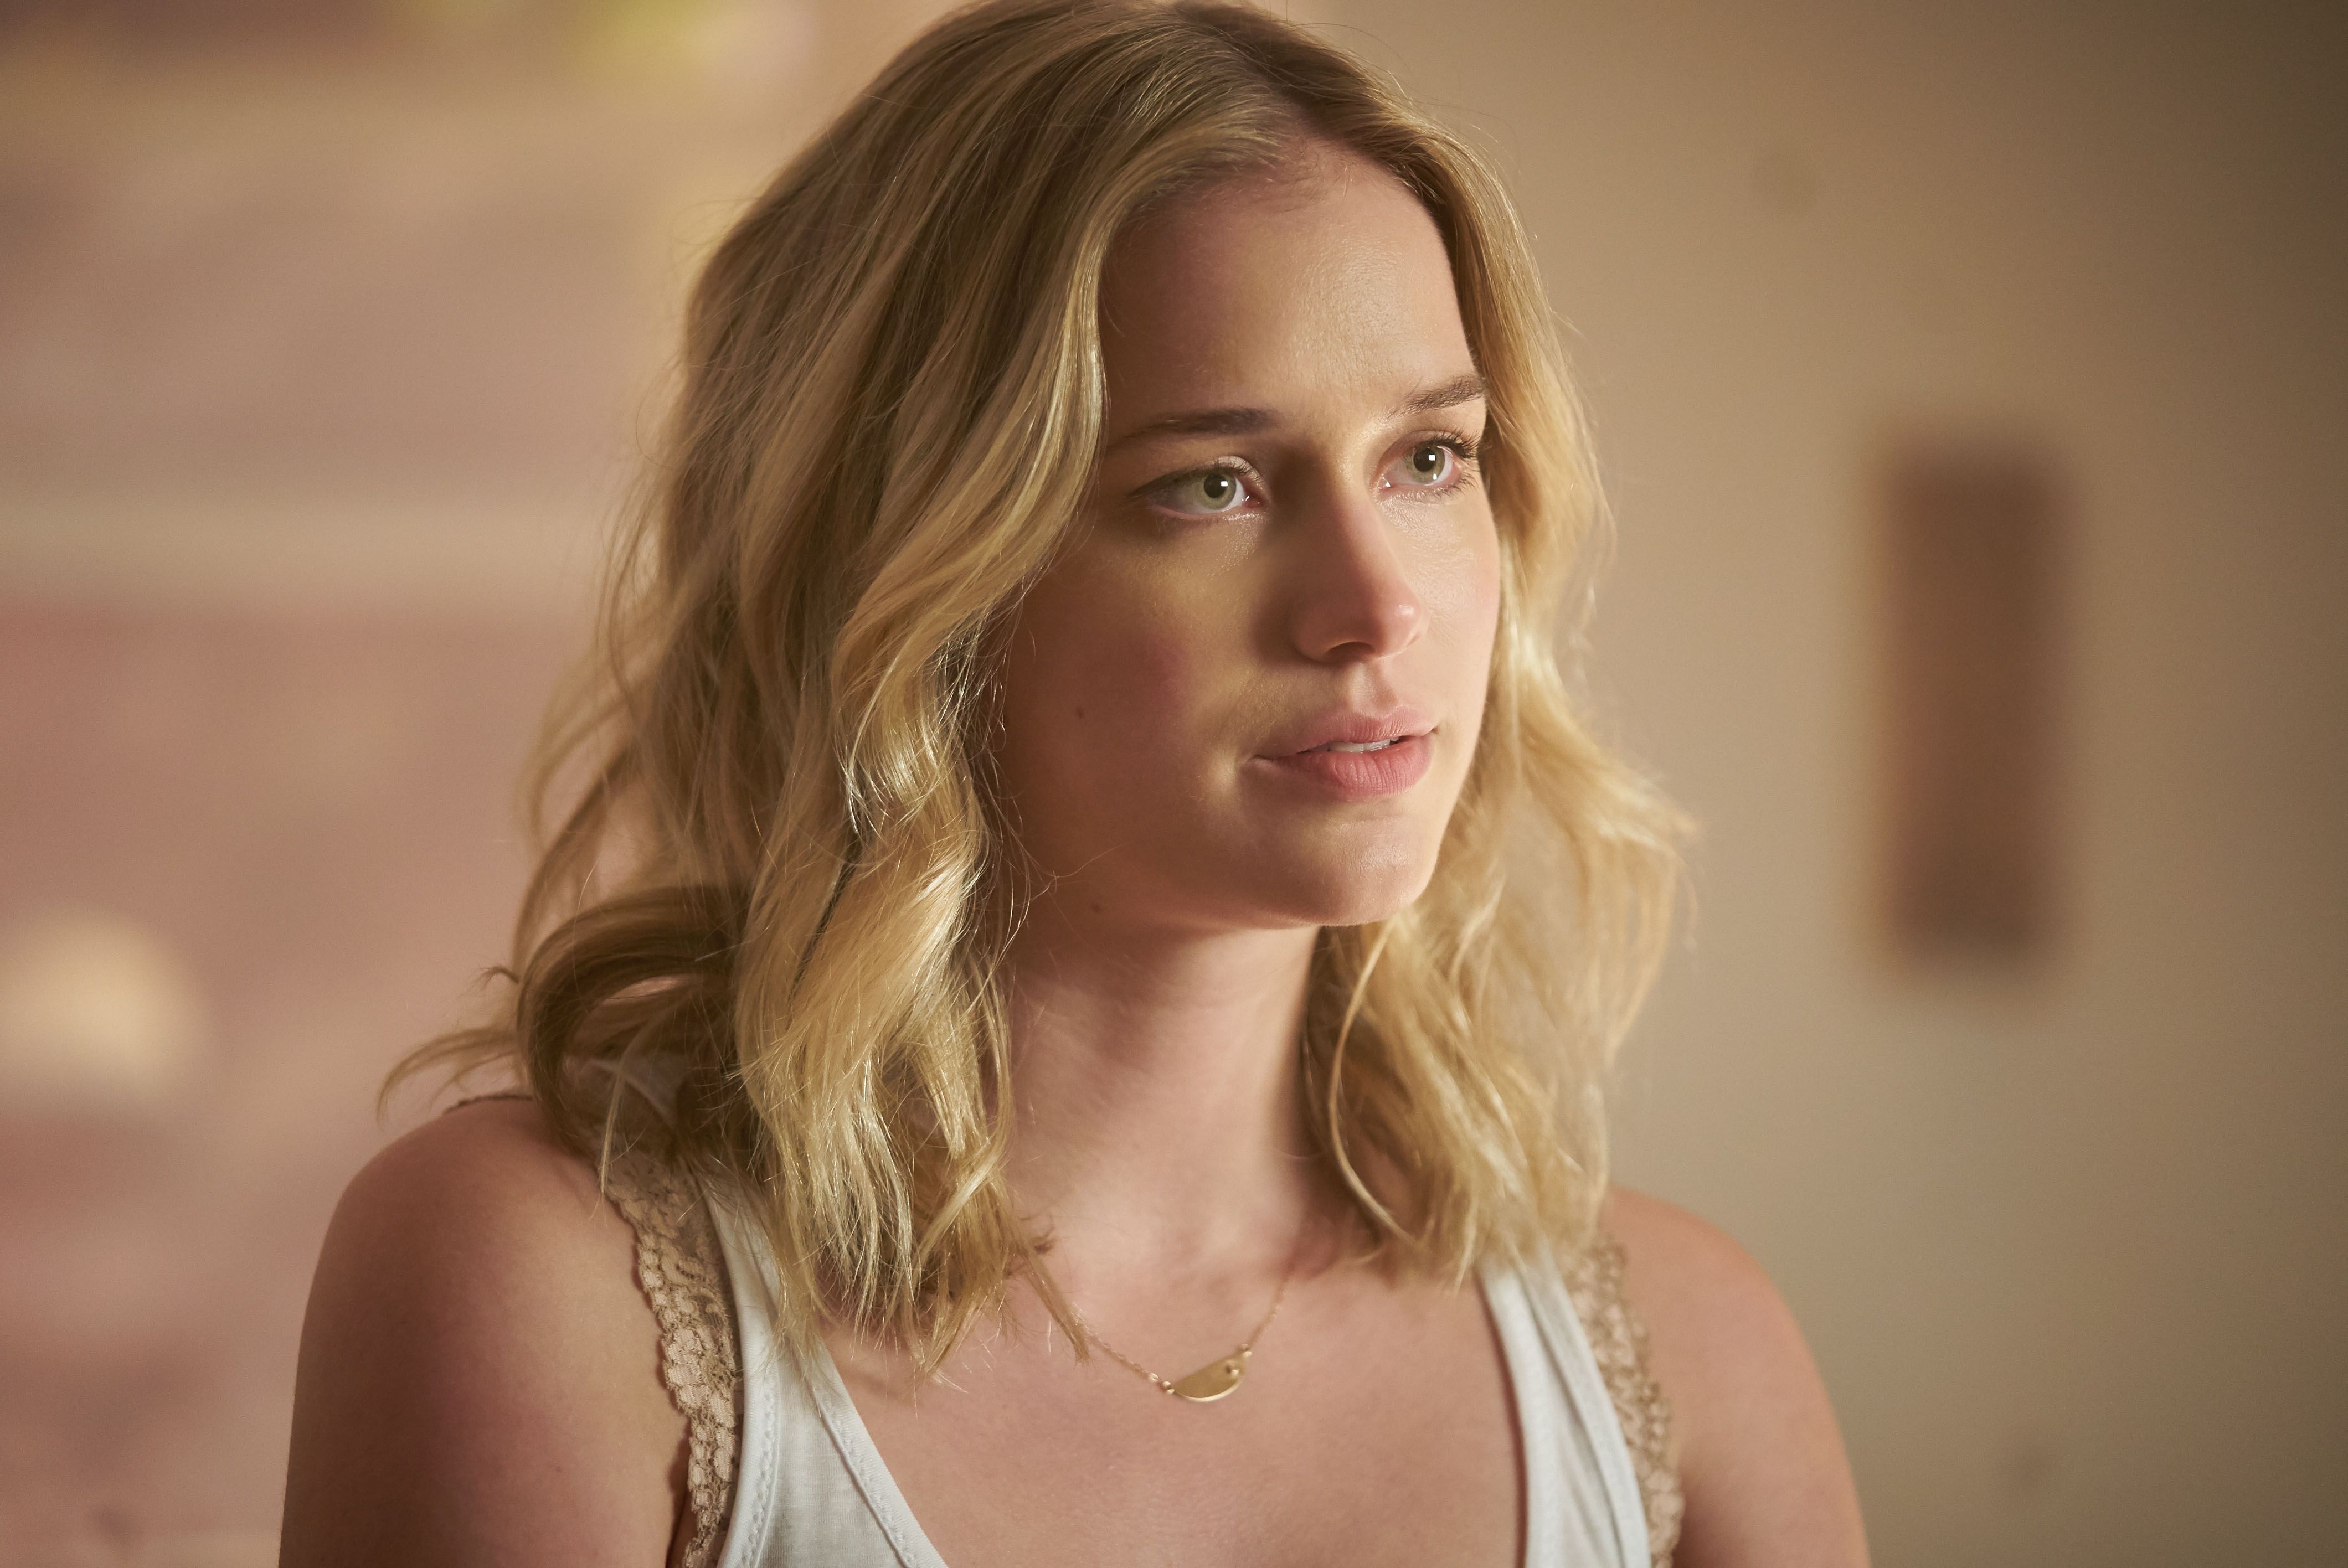 Once Upon a Time's Elizabeth Lail joins Marvel star's next movie